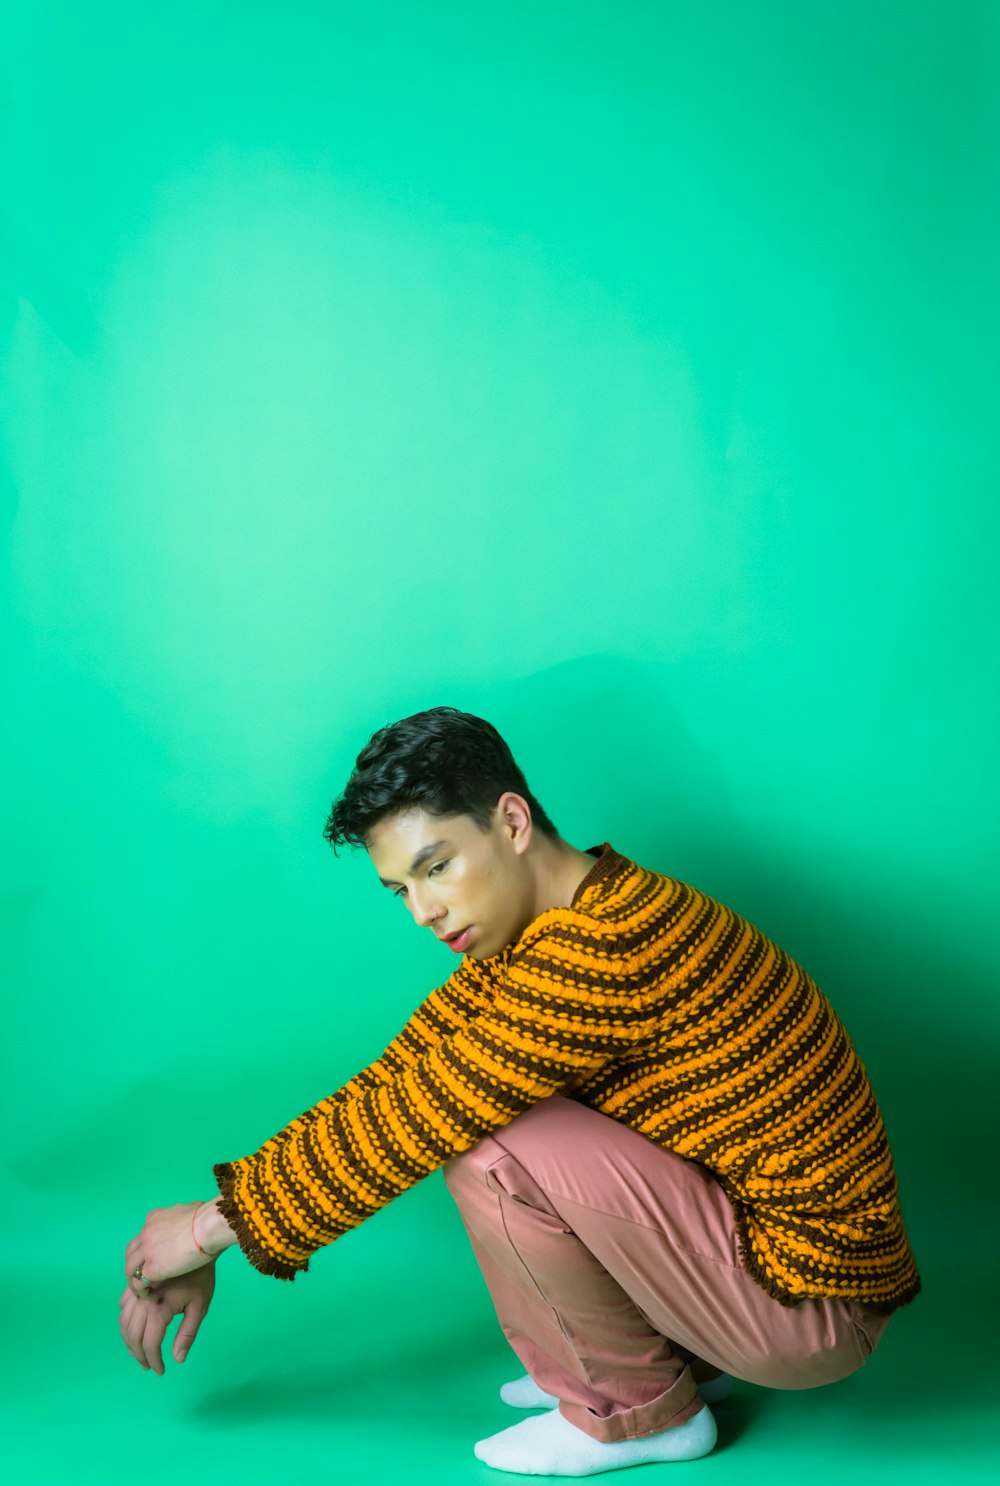 a young man squatting on a stool in front of a green background